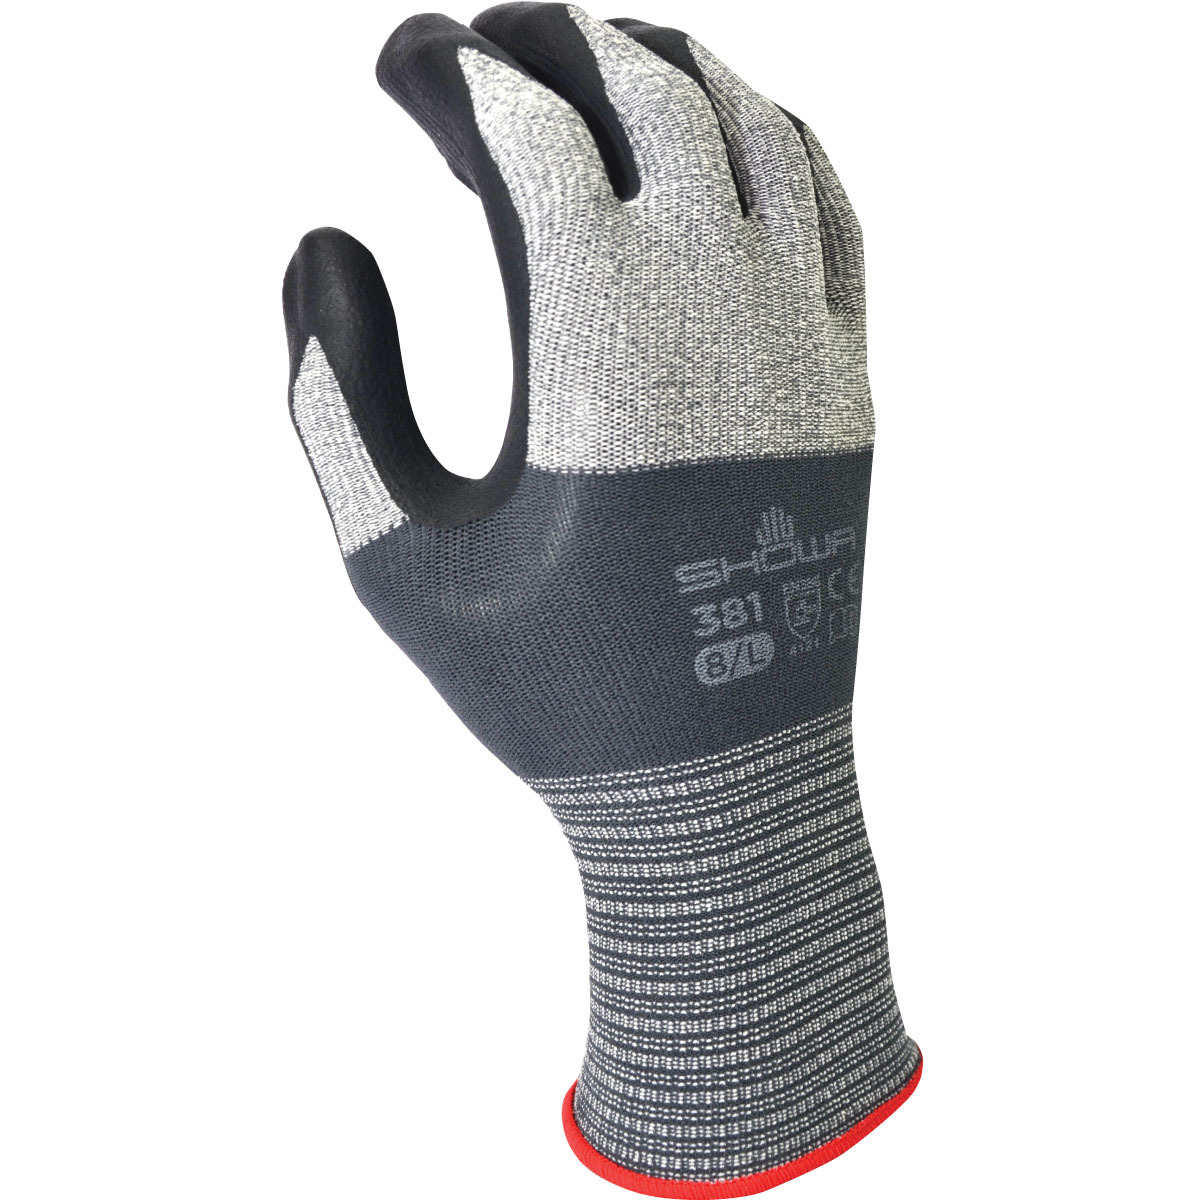 SHOWA® Size 10 13 Gauge Foam Nitrile Palm Coated Work Gloves With Microfiber And Nylon Liner And Knit Wrist